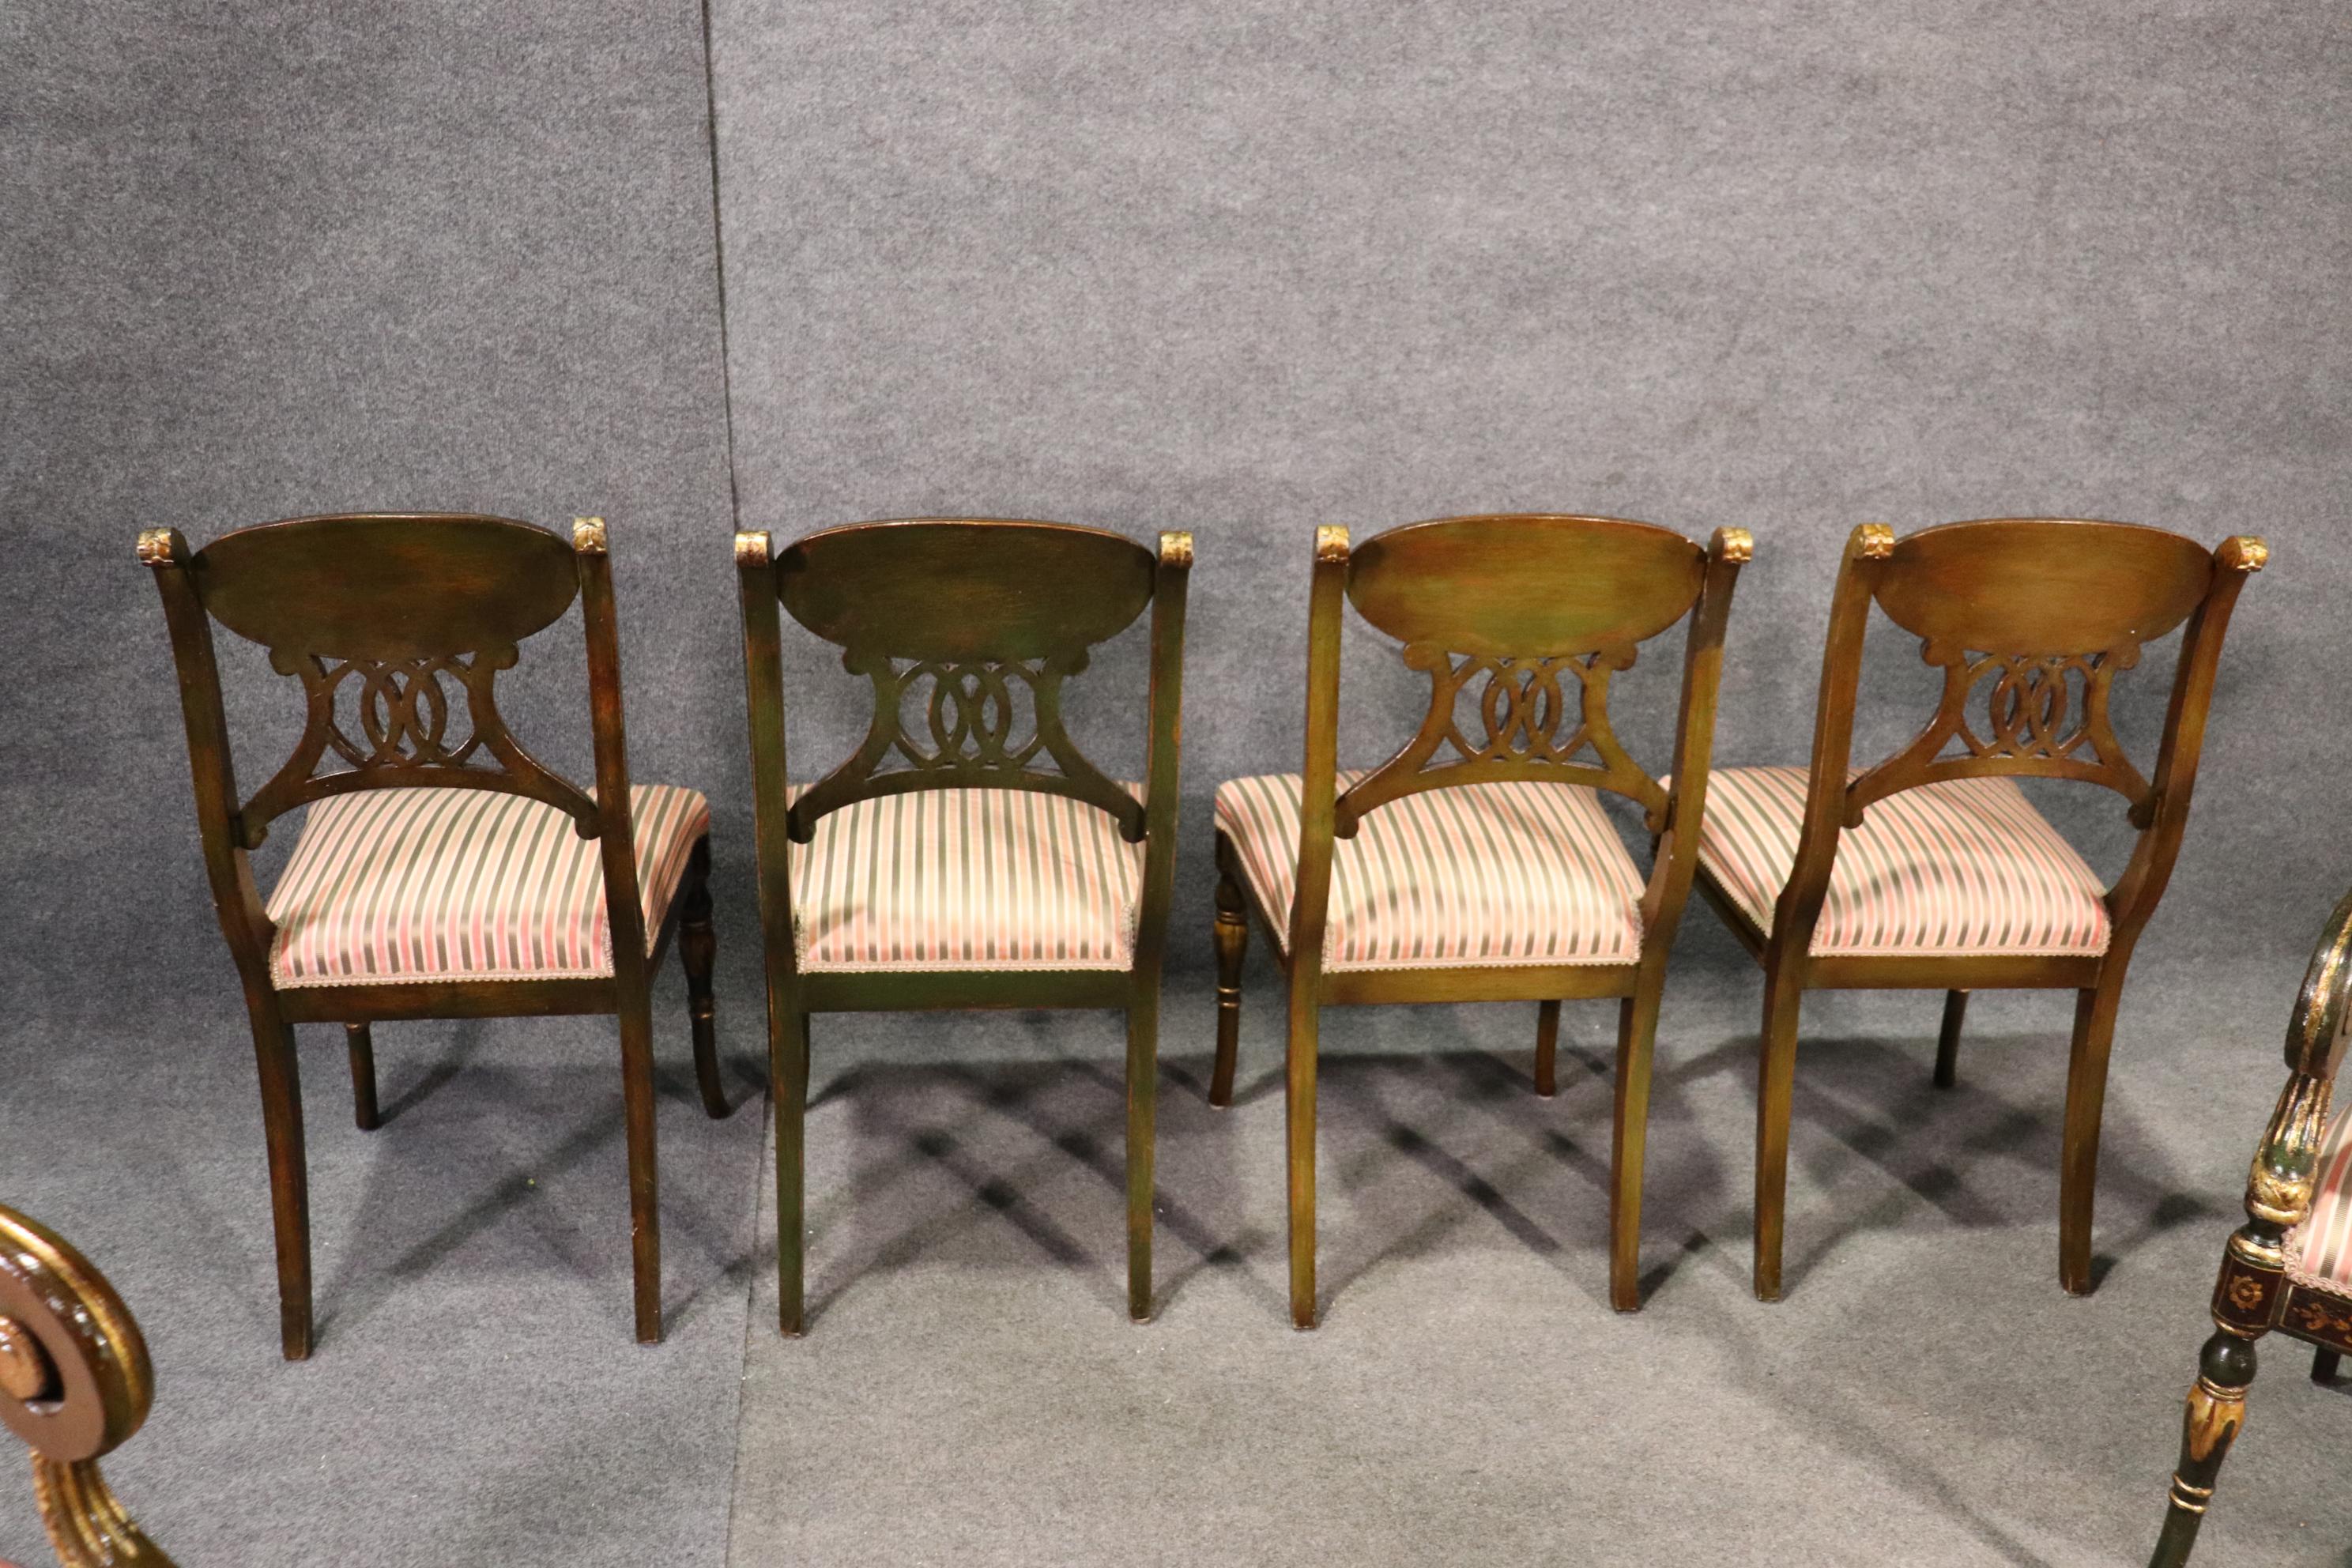 Set 8 Painted and Gilded Regency Style Dining Chairs with Musical Instruments  4